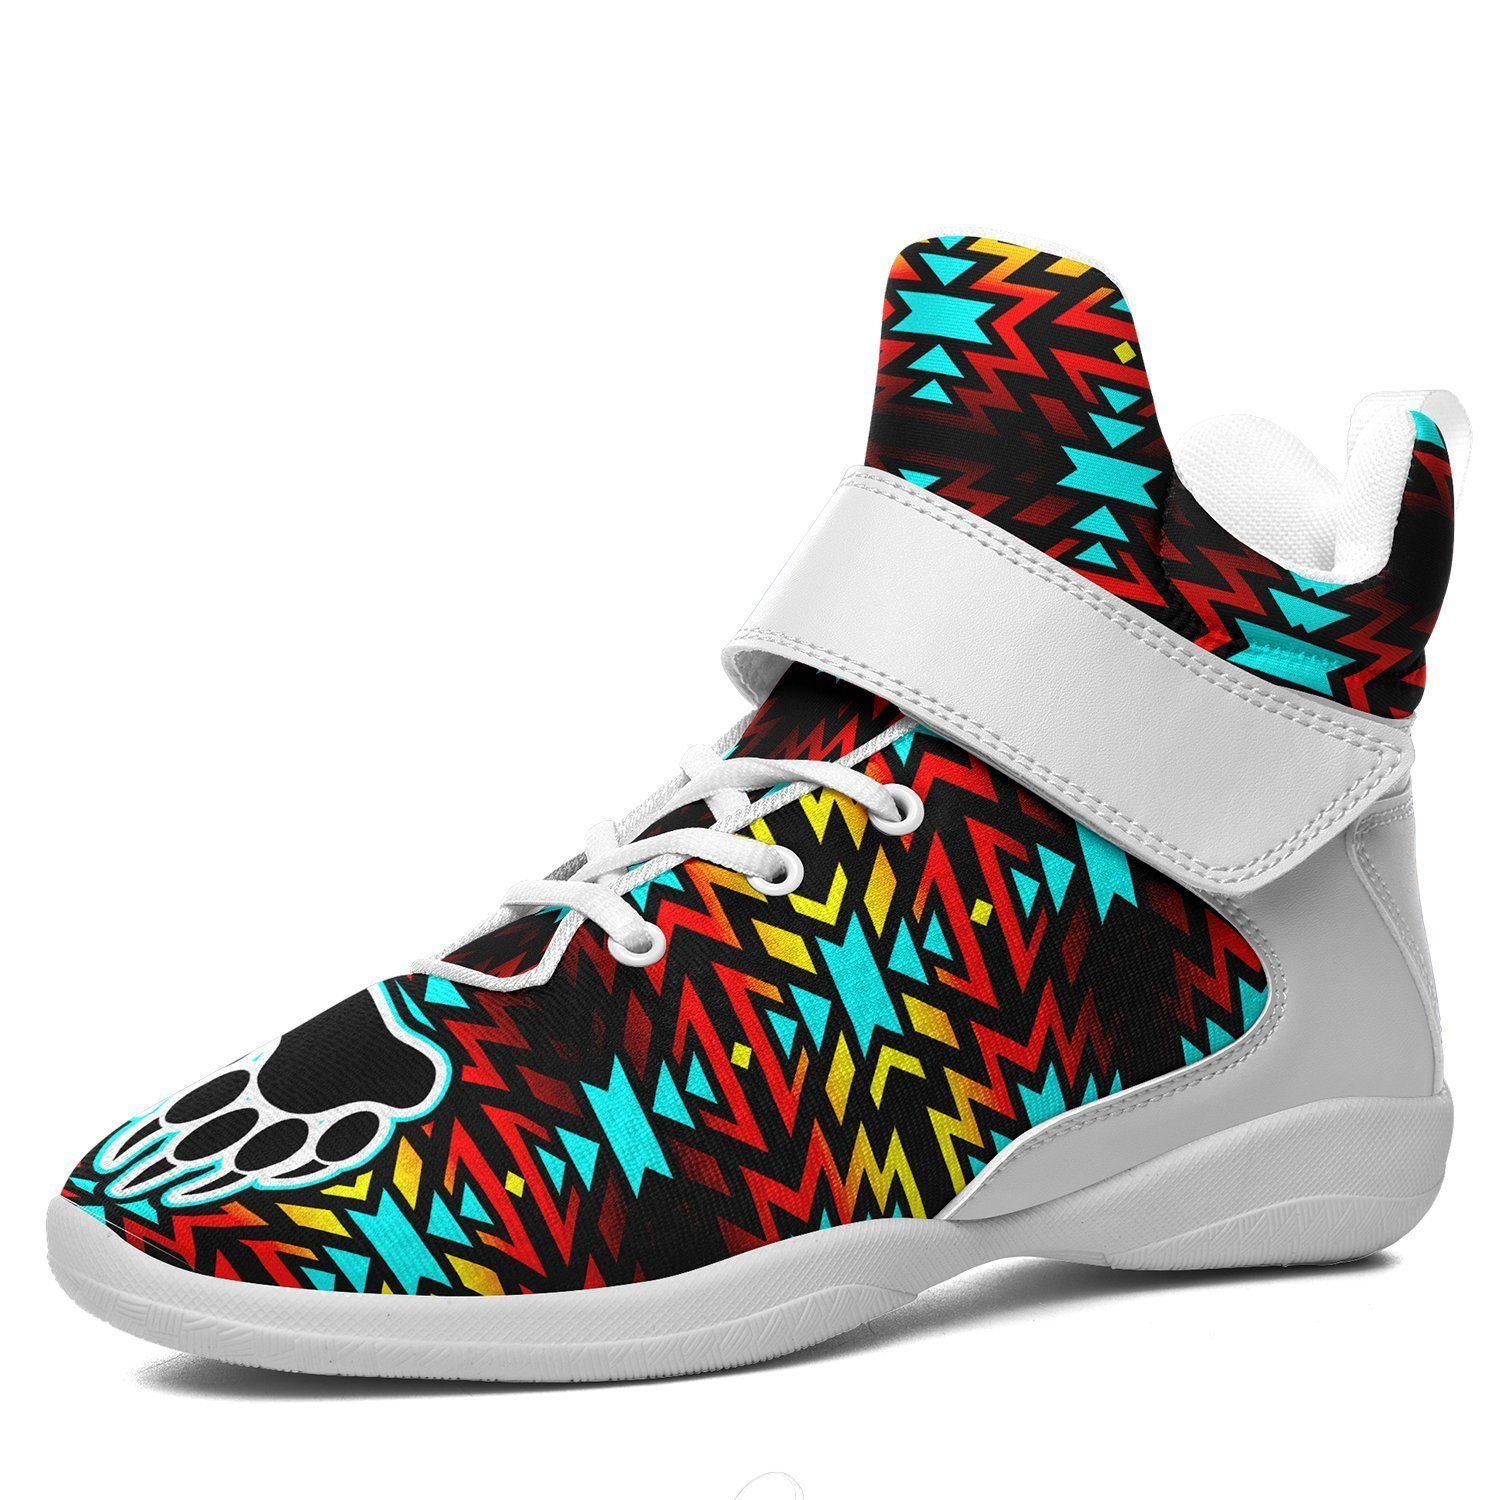 Fire Colors and Turquoise Bearpaw Ipottaa Basketball / Sport High Top Shoes - White Sole 49 Dzine US Men 7 / EUR 40 White Sole with White Strap 